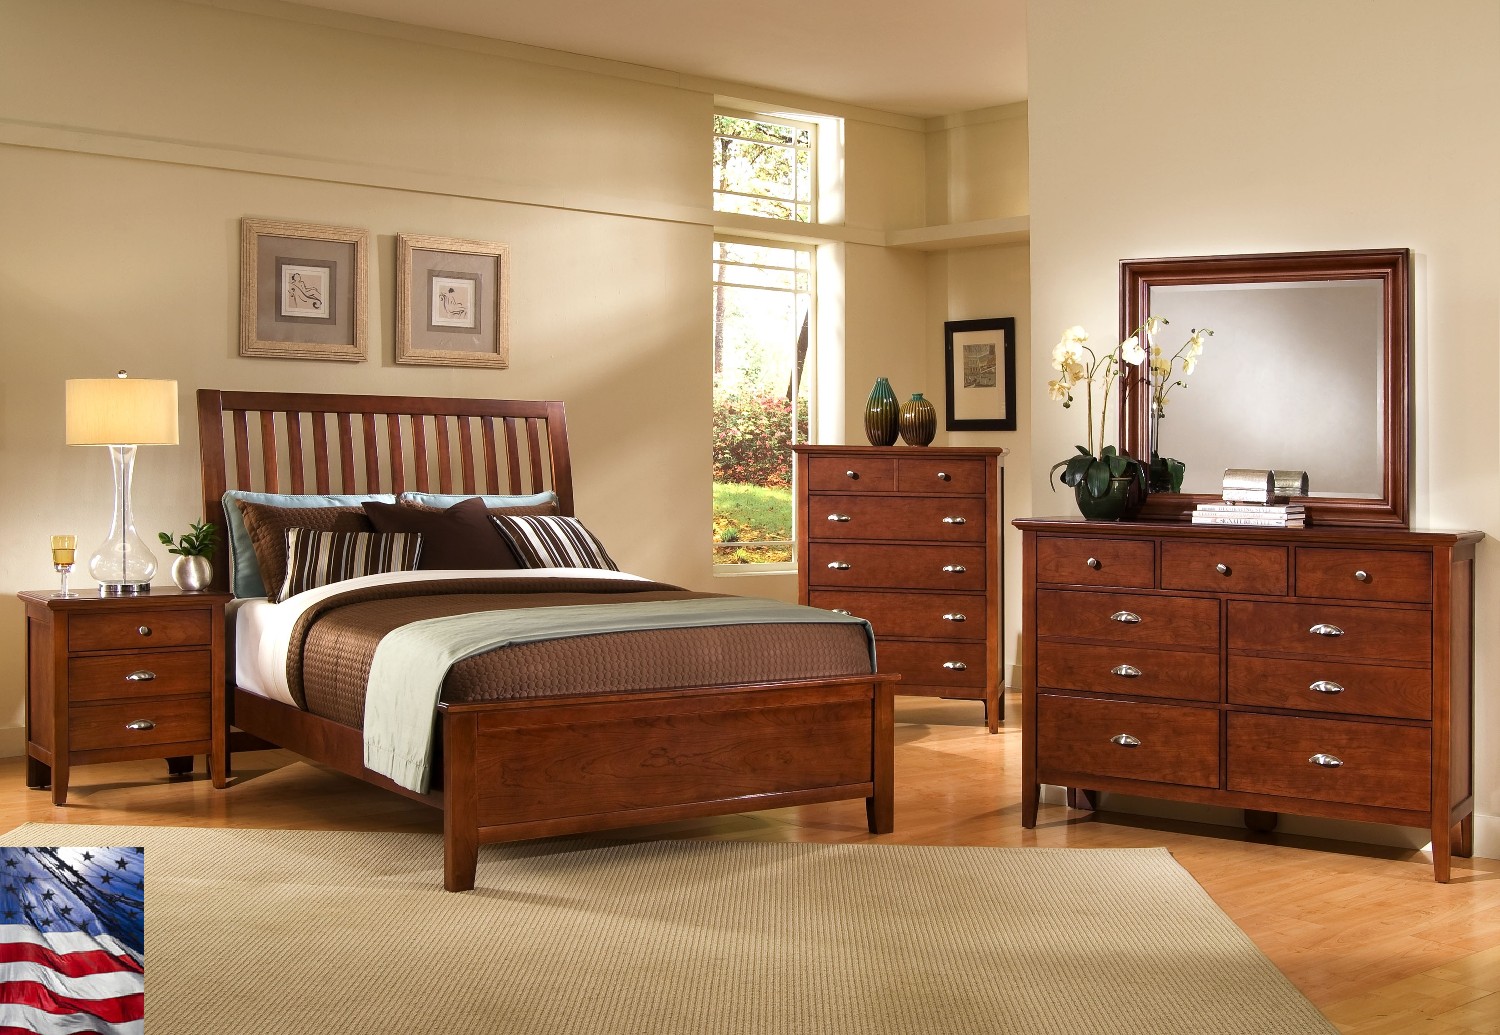 bedroom ideas with brown furniture modern